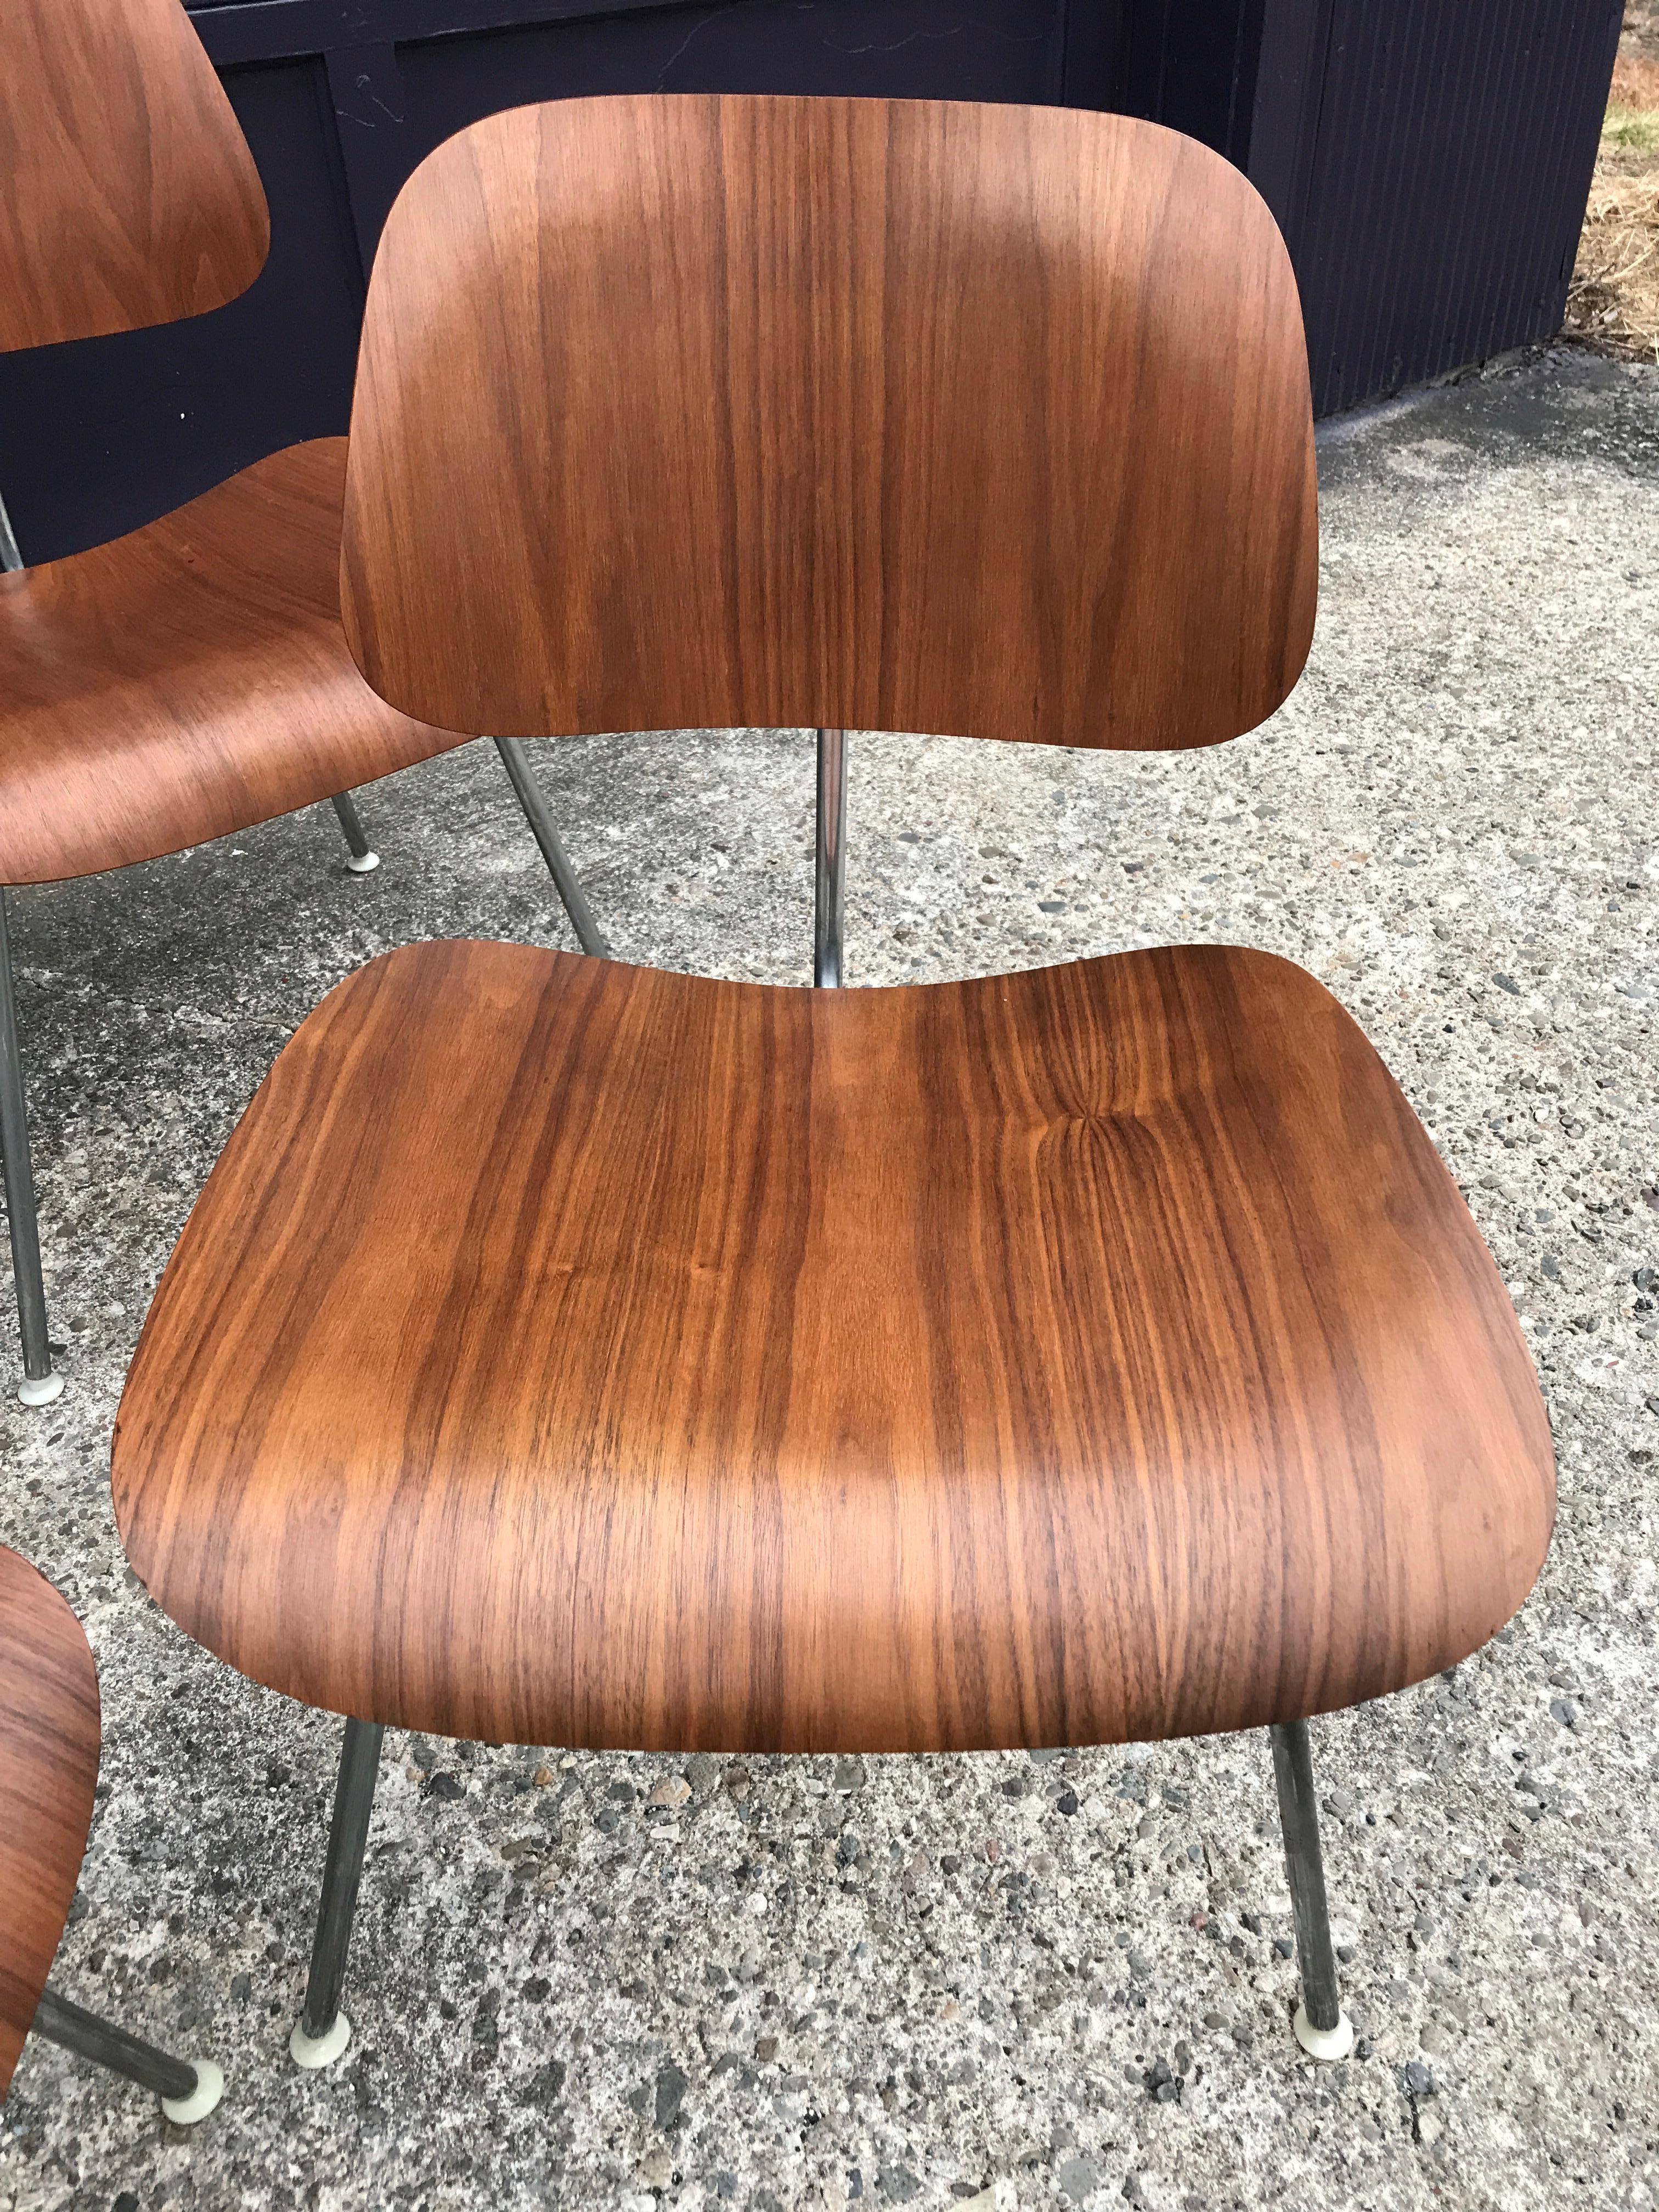 Gorgeous set of 4 matches Herman Miller Eames DCM dining chairs in walnut. Gorgeous vibrant color and amazing grain patterns. Signed with black Herman Miller tags. All nylons glides present for use on different types of floors.